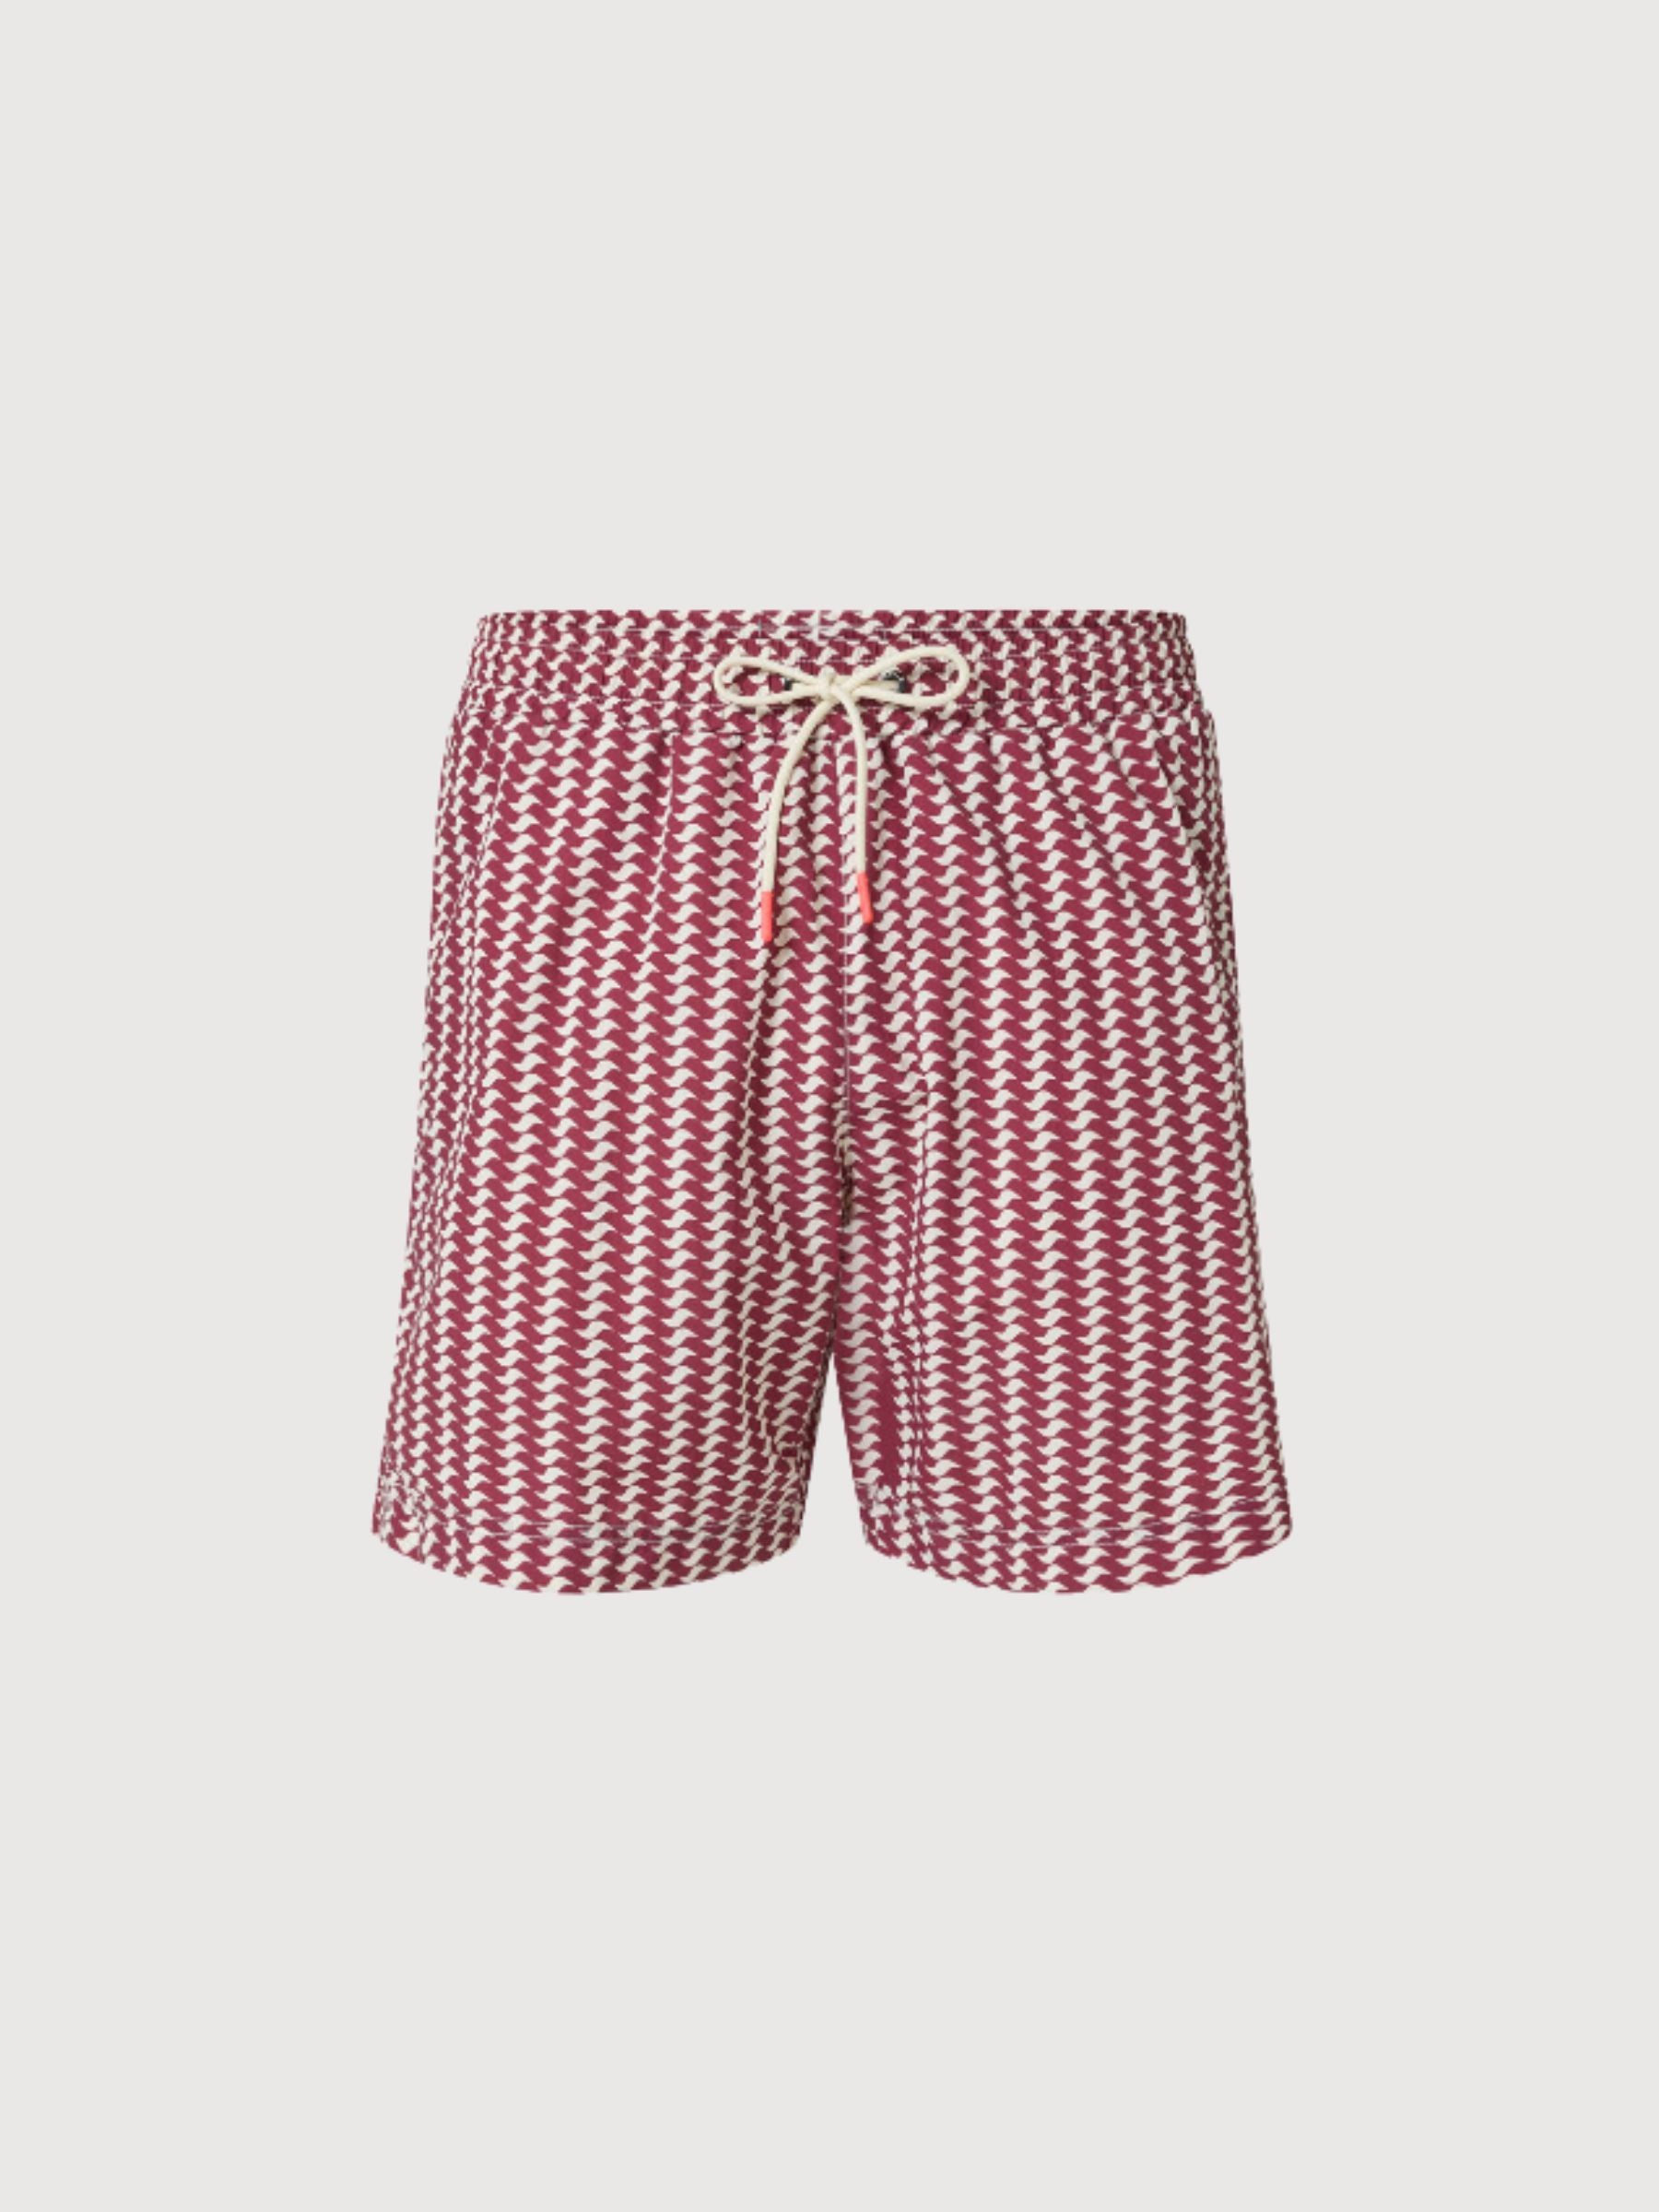 Swimsuit Man Bequia Red in Recycled Nylon | Ecoalf